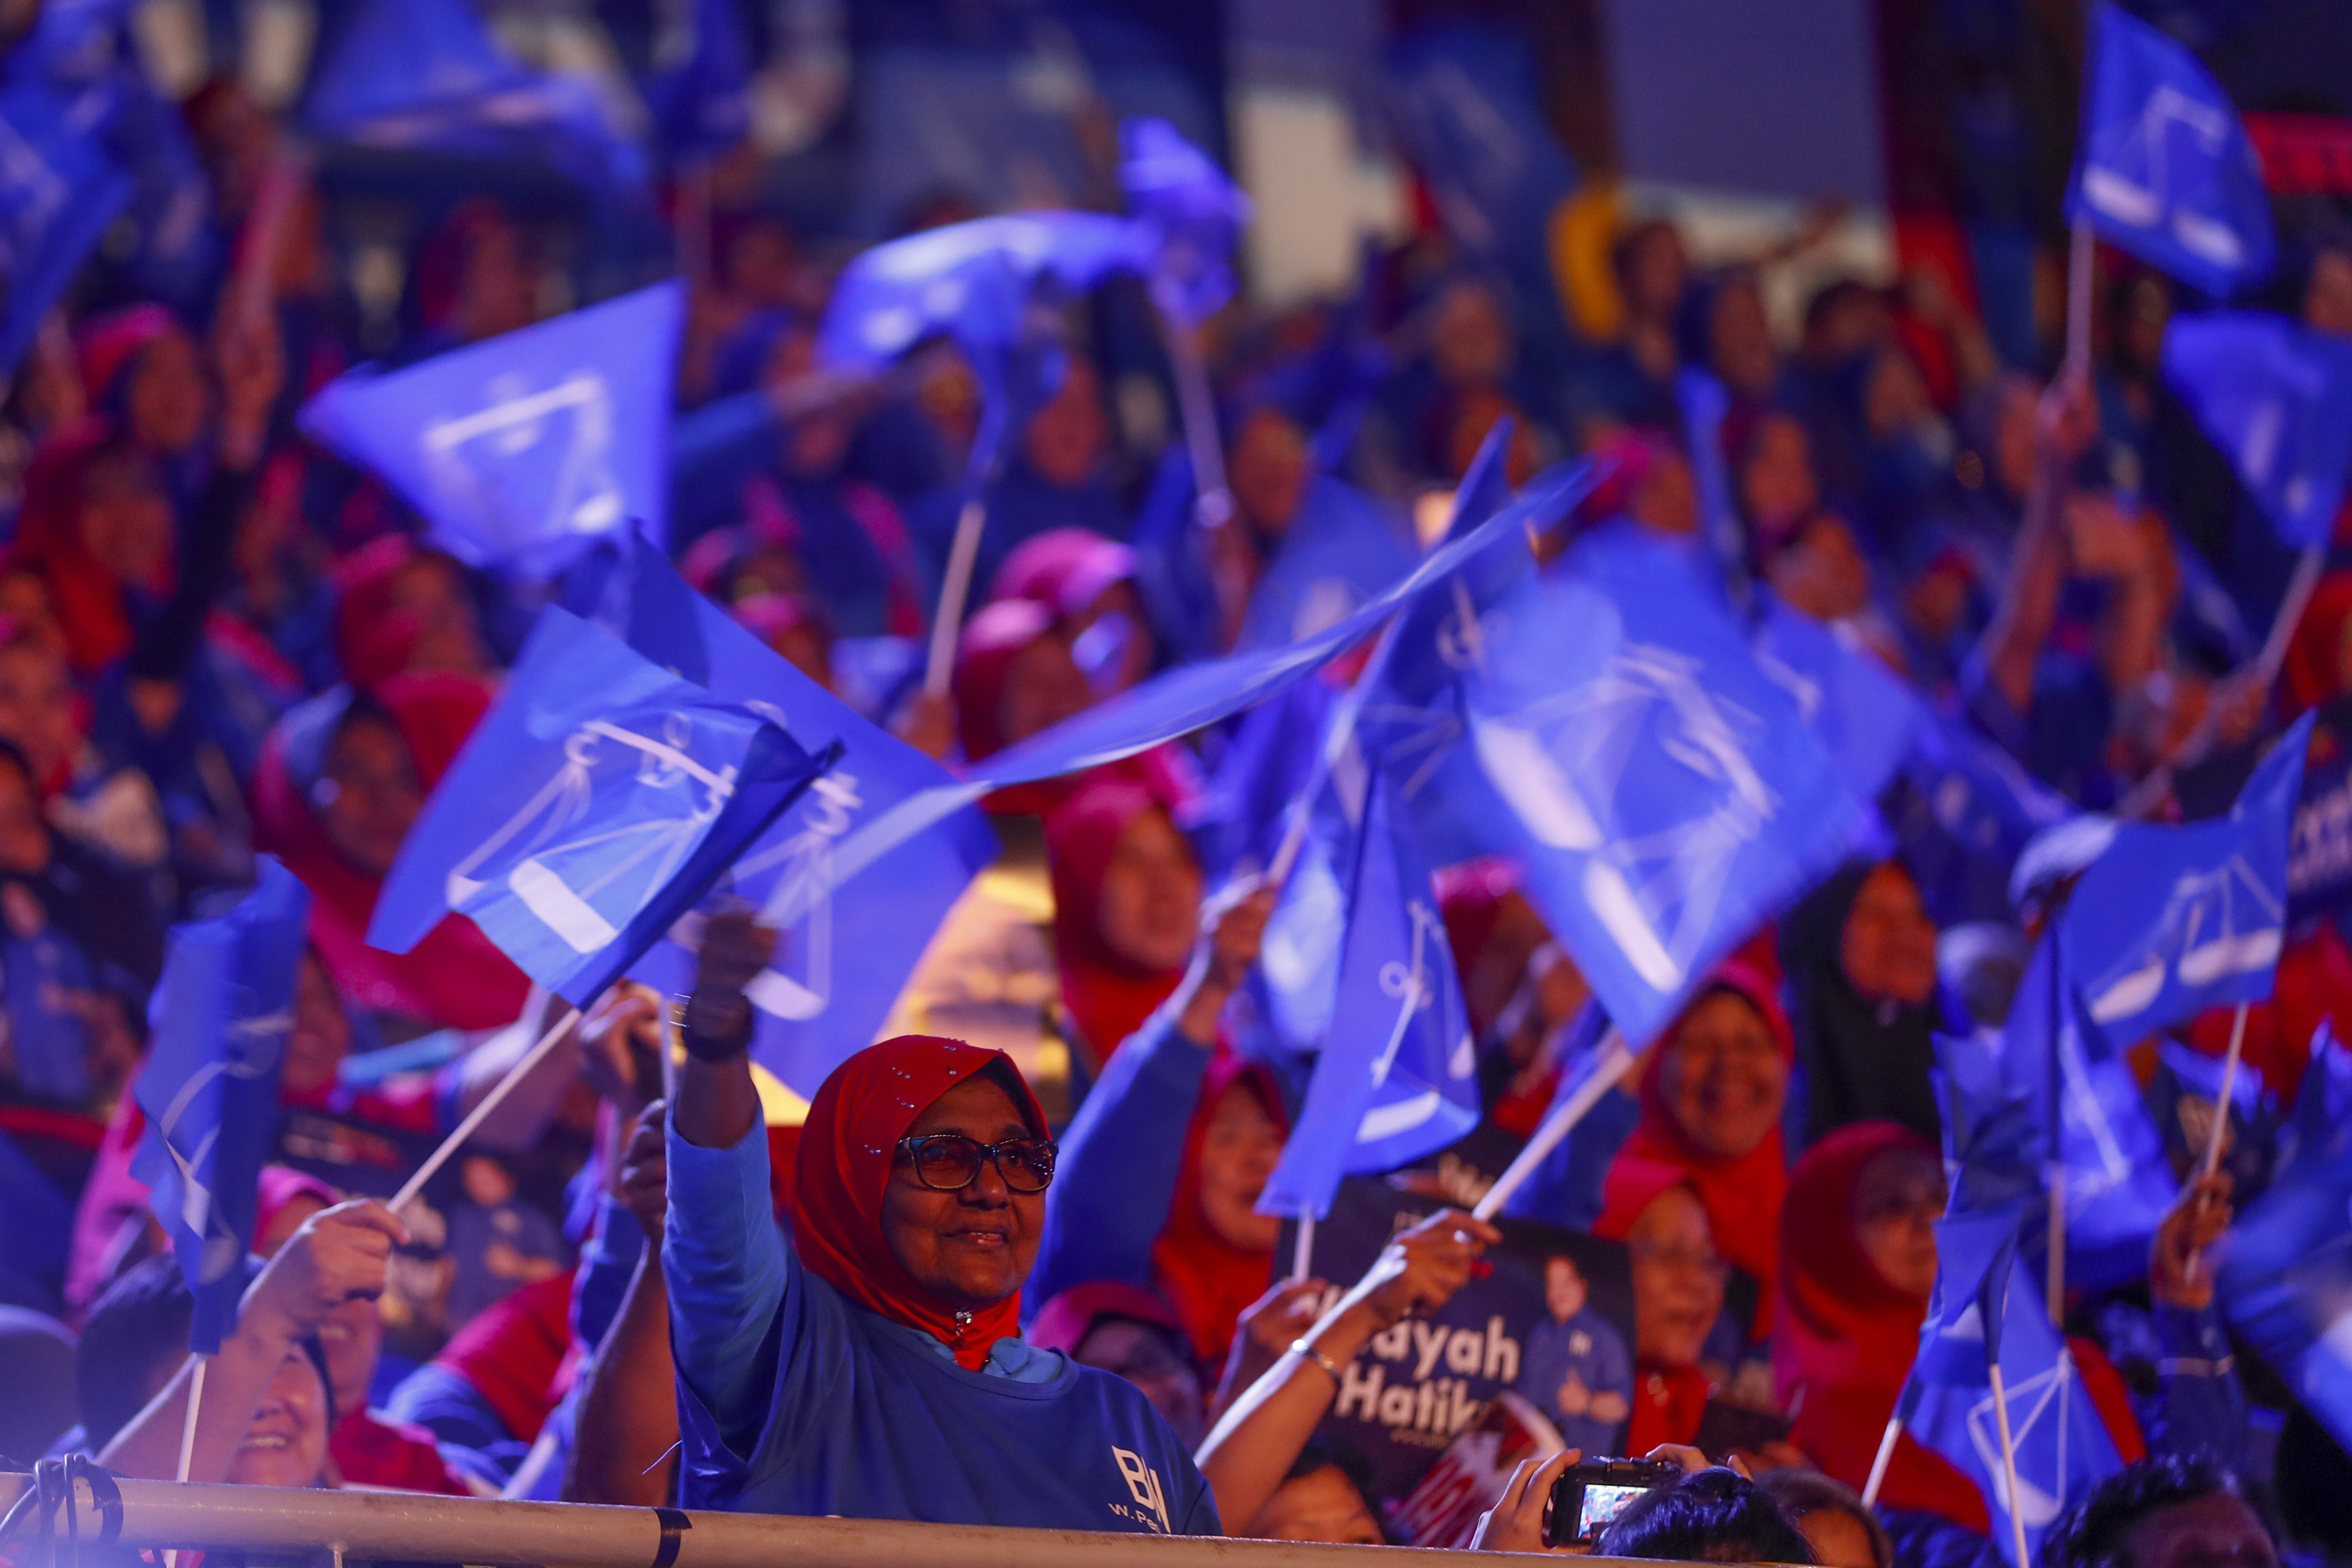 Rising living costs feature heavily in the manifestos of Najib’s Barisan Nasional and Mahathir’s Pakatan Harapan. Whether voters believe either side can solve what polls suggest is their greatest concern is another matter